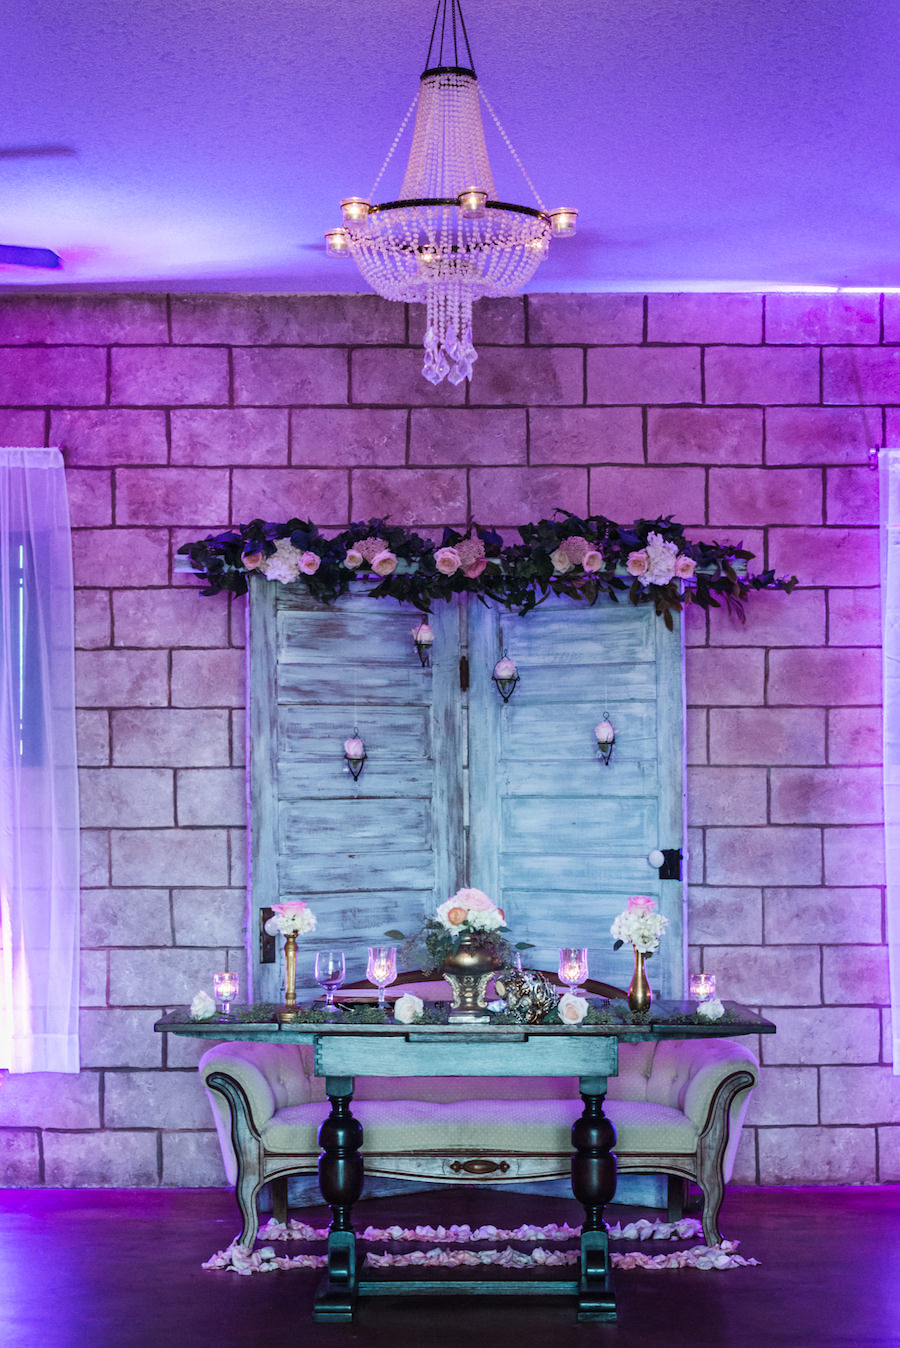 Wedding Reception Sweetheart Table Decor with Distressed, Wooden Doors, Vintage Cream Settee, White and Pink Floral Centerpieces and Purple Uplighting | Elegant Rustic Wedding Inspiration